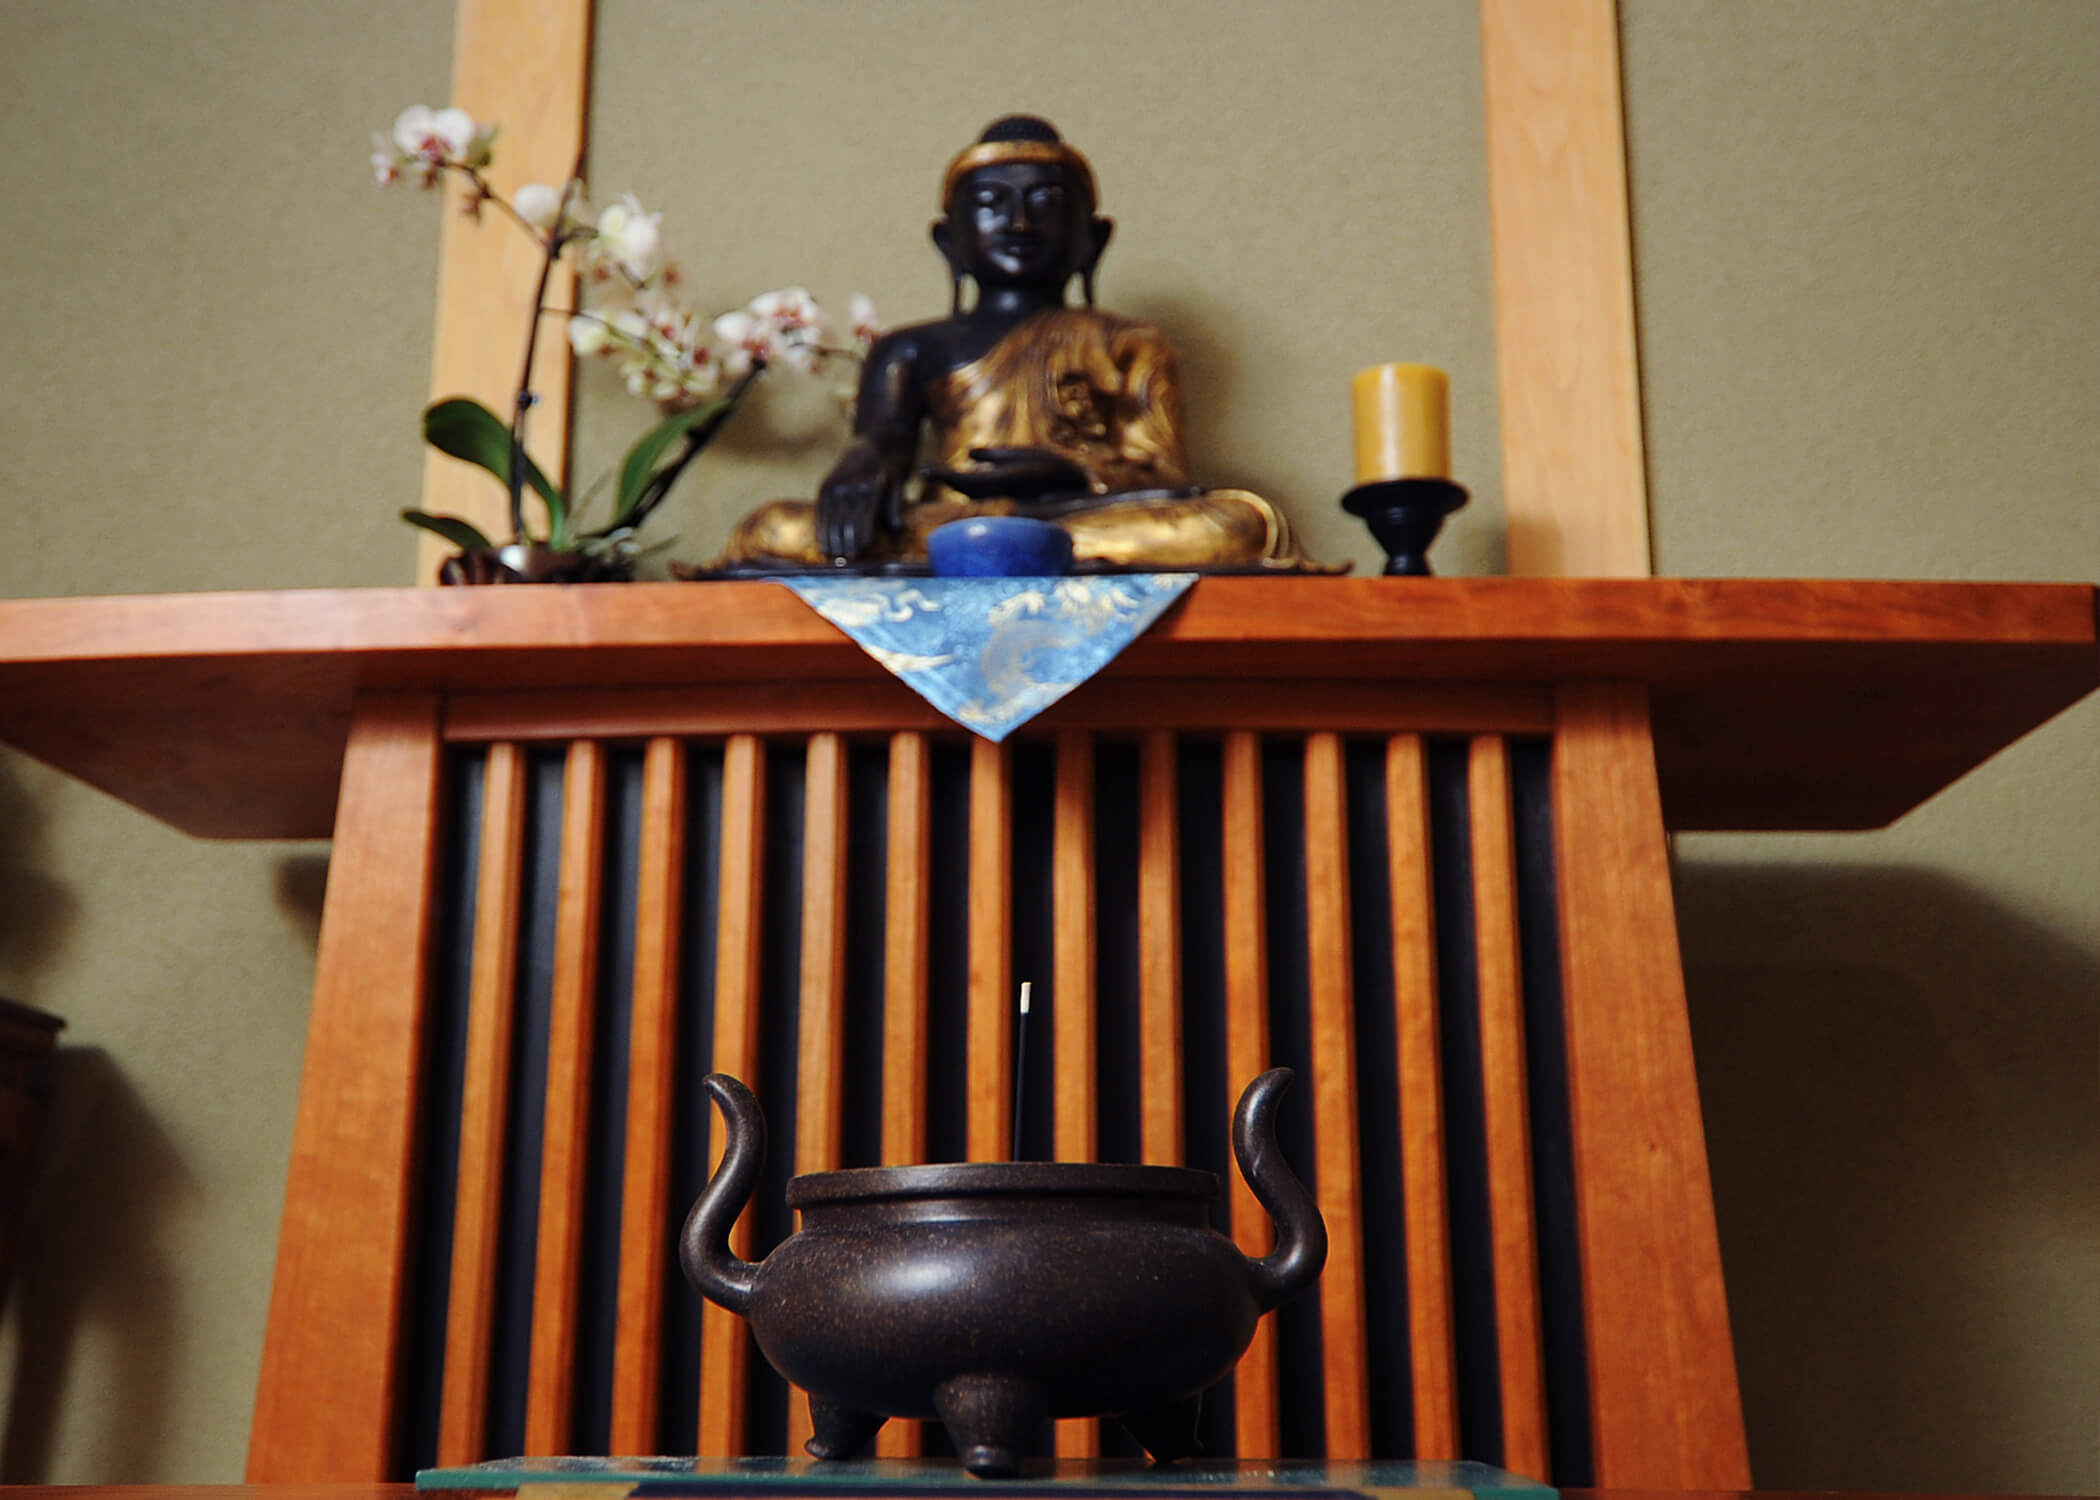 Image of a Buddhist meditation room at the U.S. Air Force Academy..